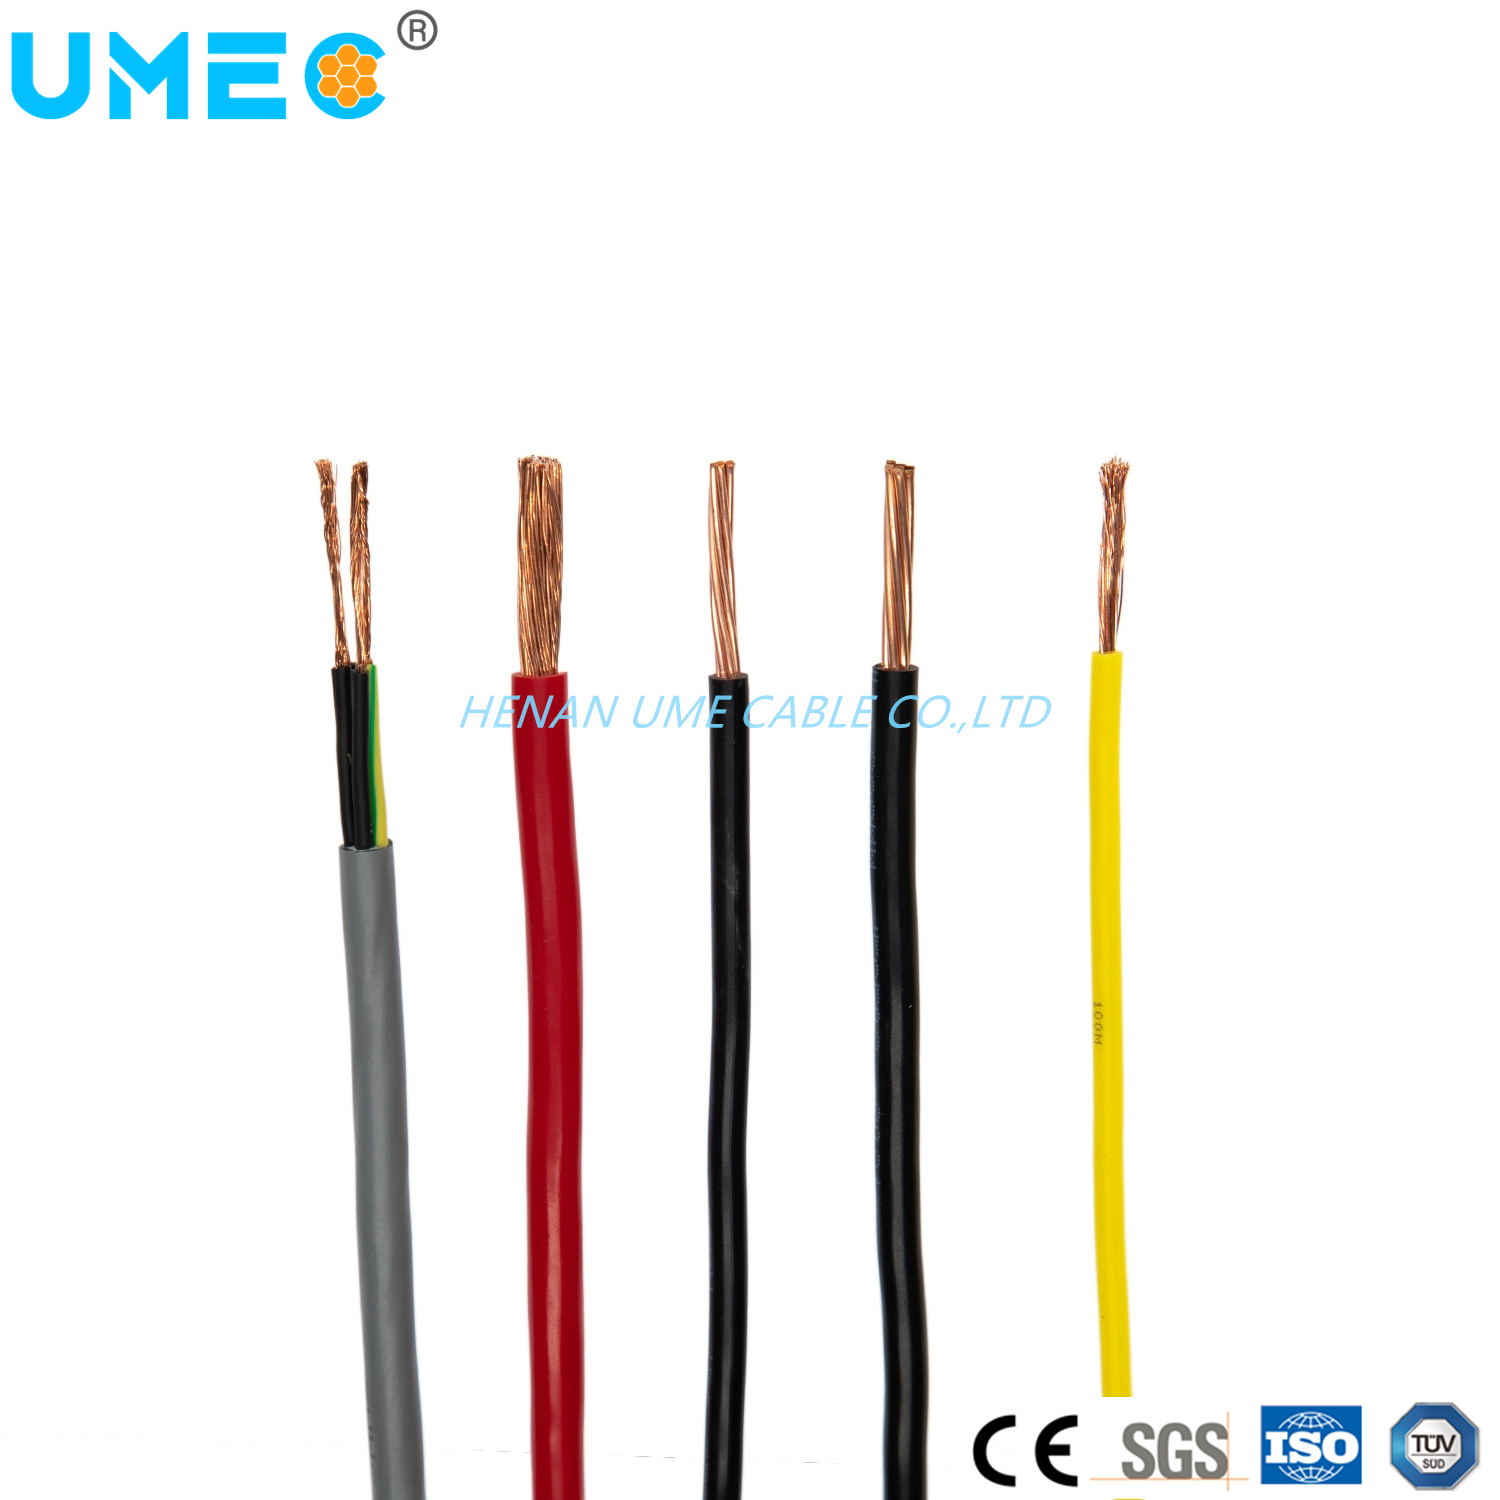 IEC ASTM Standard Lighting Wire Thermoplastic Insulation Oxygen Free Copper Conductor Tw/ Thw/ Thw-2 Cable Wire